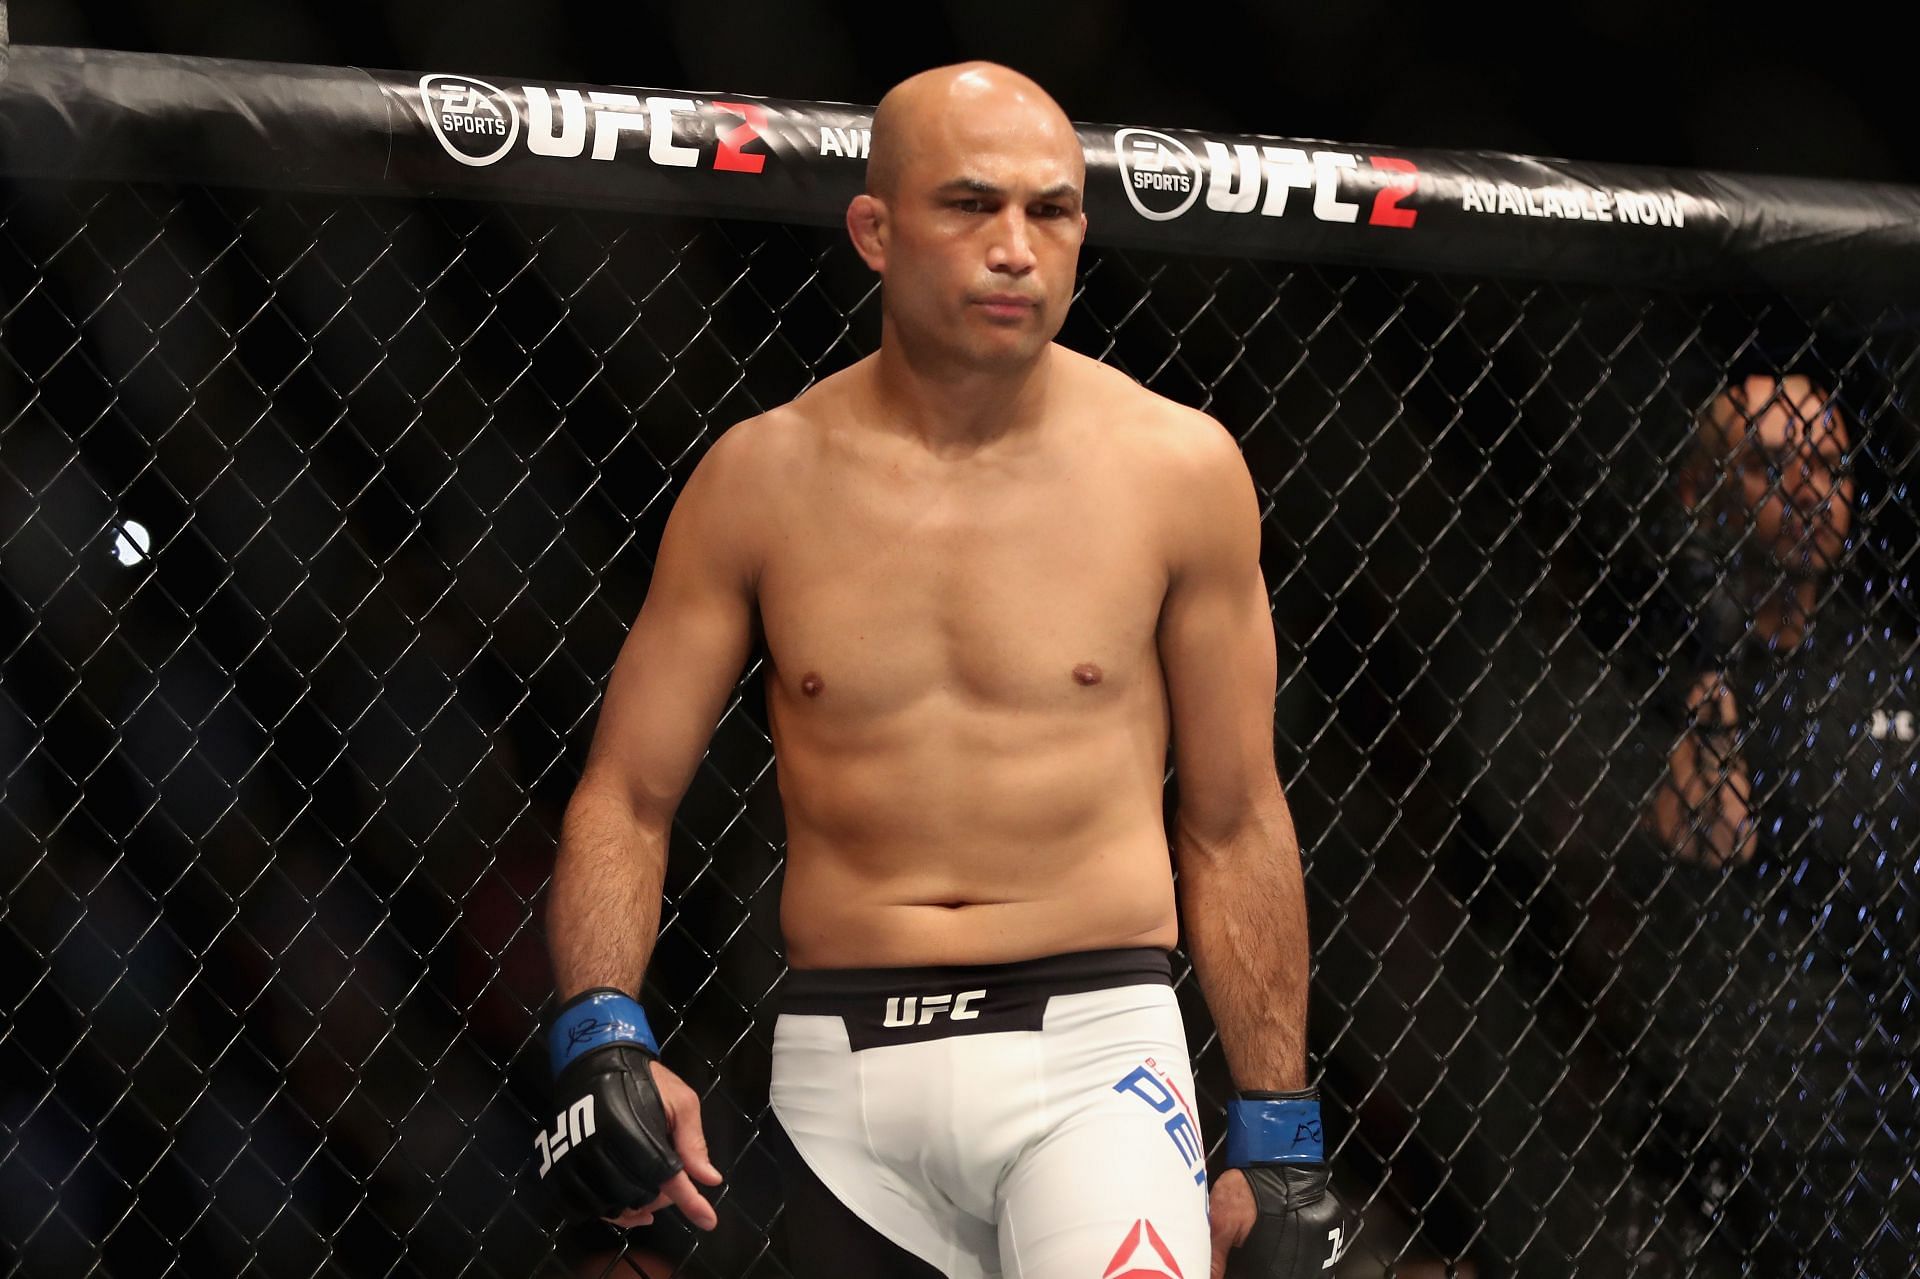 BJ Penn went onto become a legend after a much-hyped octagon debut in 2001